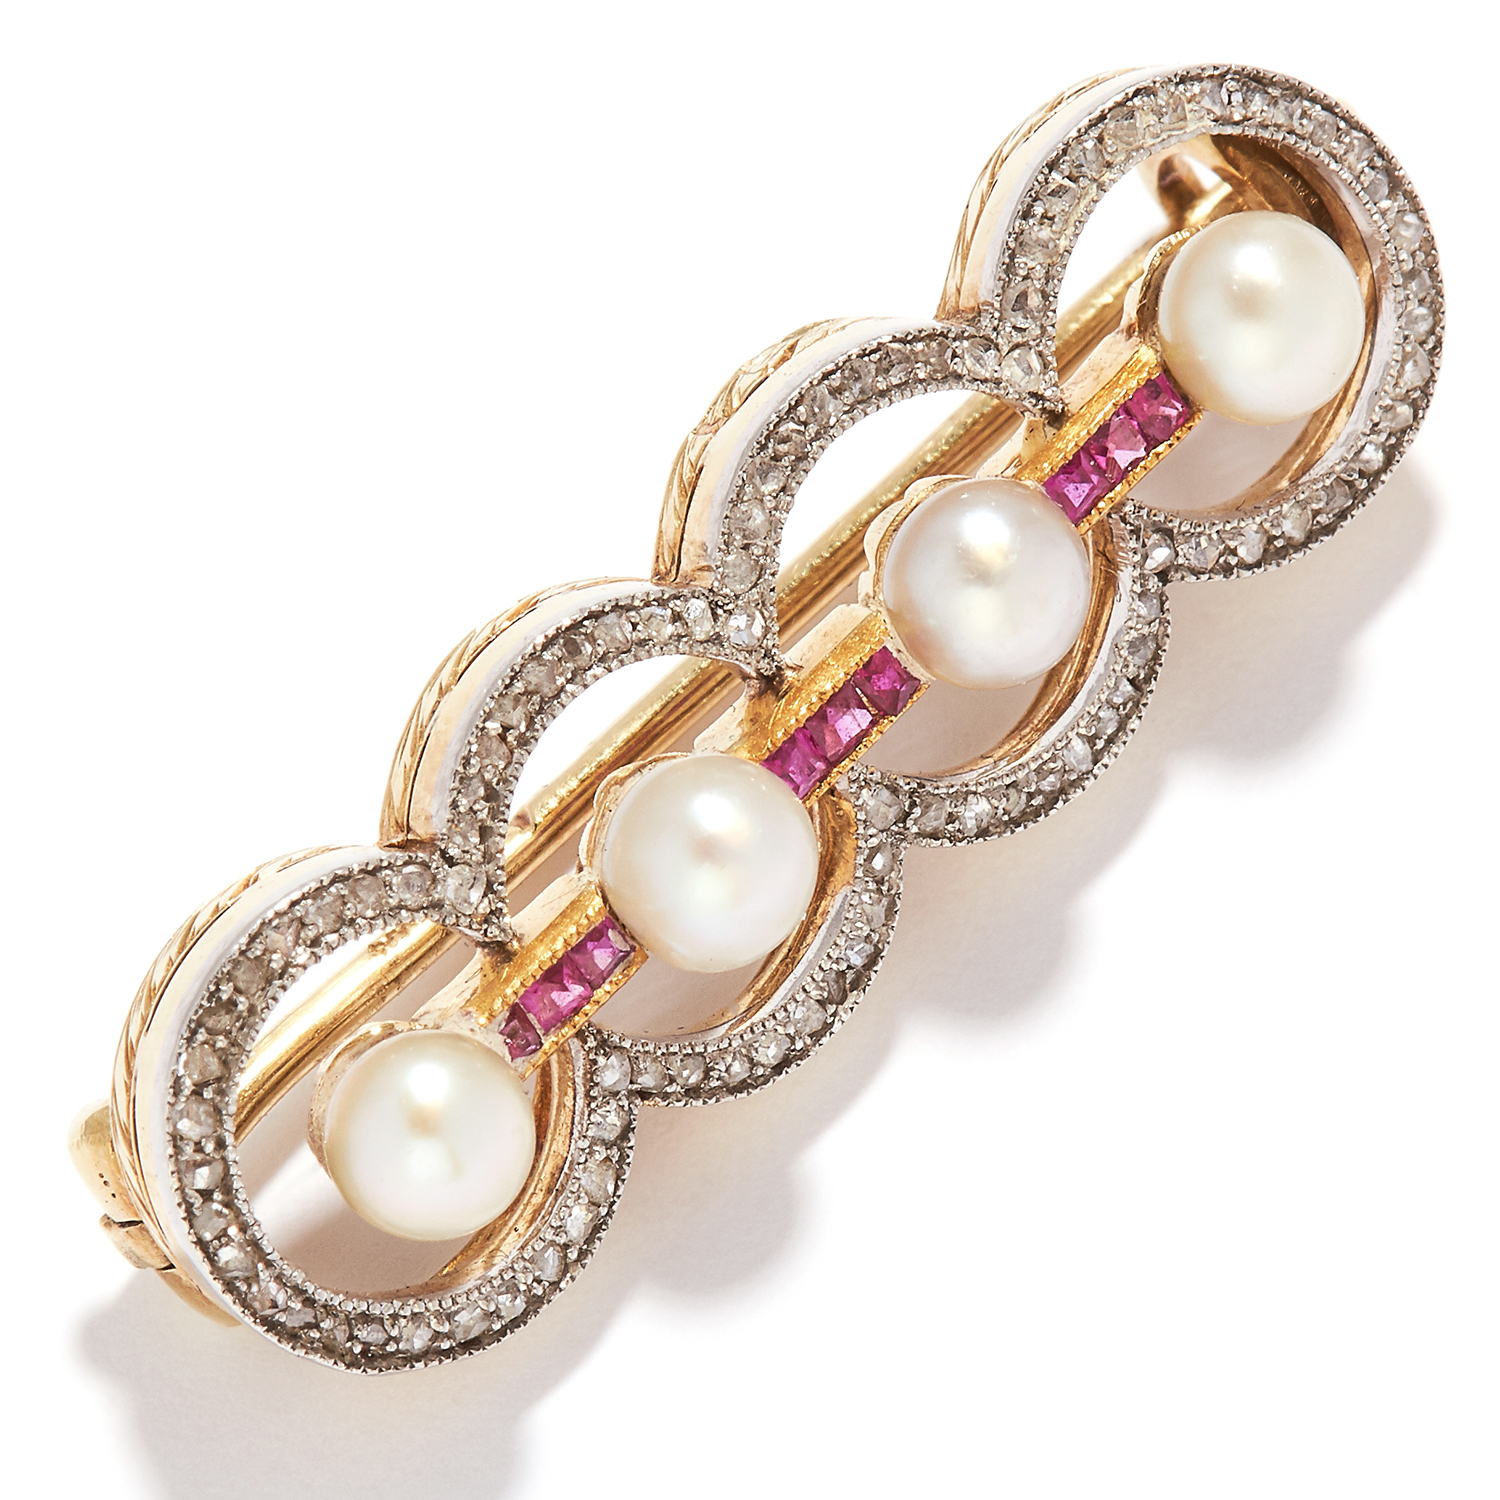 ANTIQUE IMPERIAL RUSSIAN PEARL, RUBY AND DIAMOND BROOCH, CIRCA 1910 in 56 zolotnik gold, set with